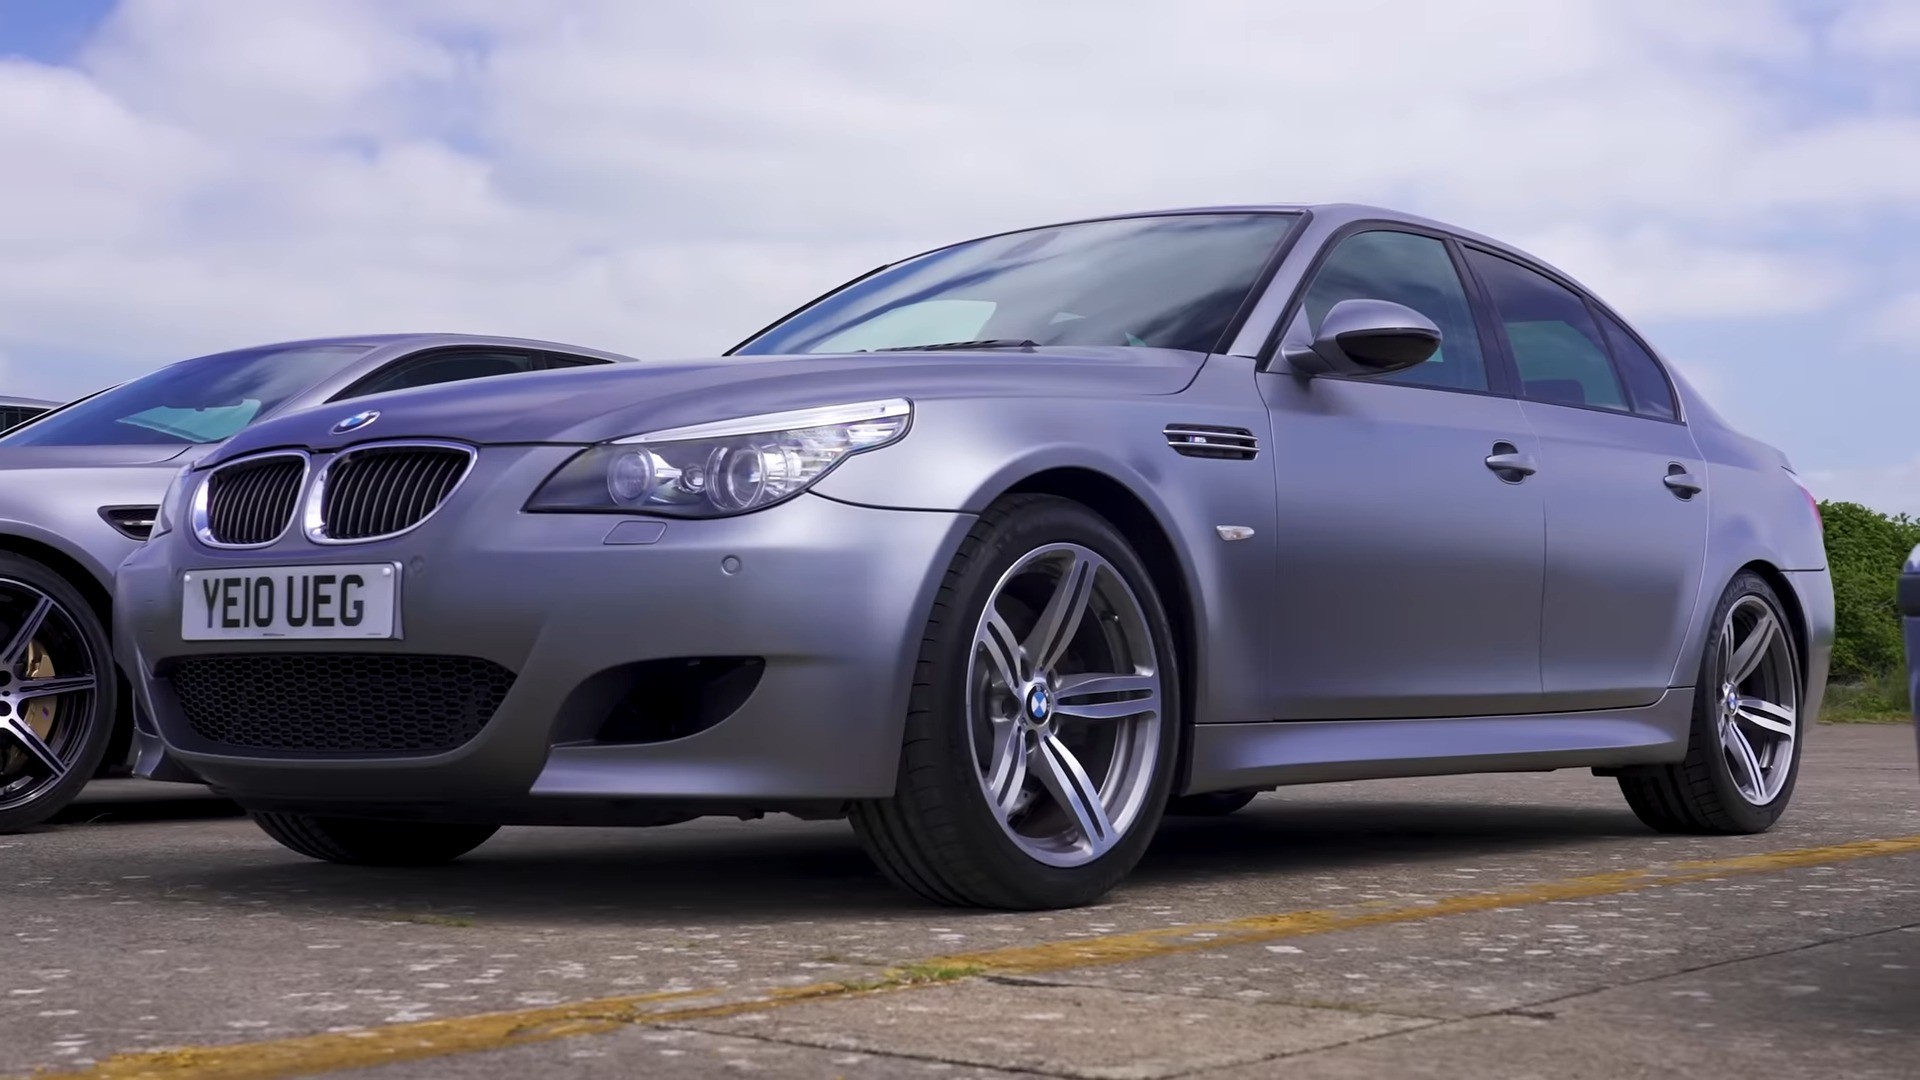 BMW M5 F10 Doesn't Have the Balls To Beat Older E60 in a Drag Race